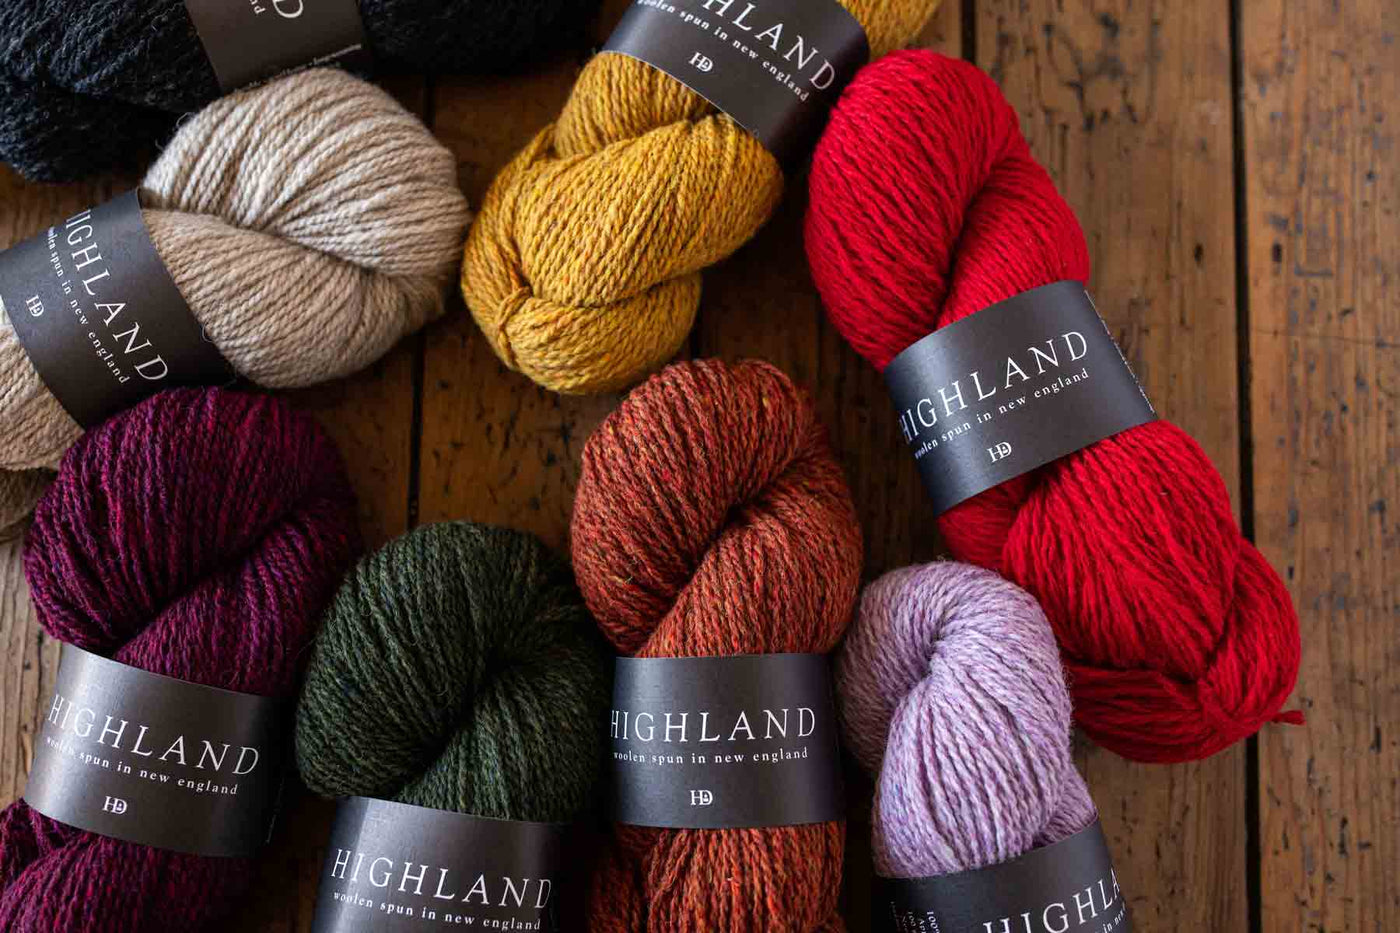 Harrisville Designs, Harrisville, Cheshire County, New Hampshire, United  States Stock Image - Image of backdrop, knitting: 117484825